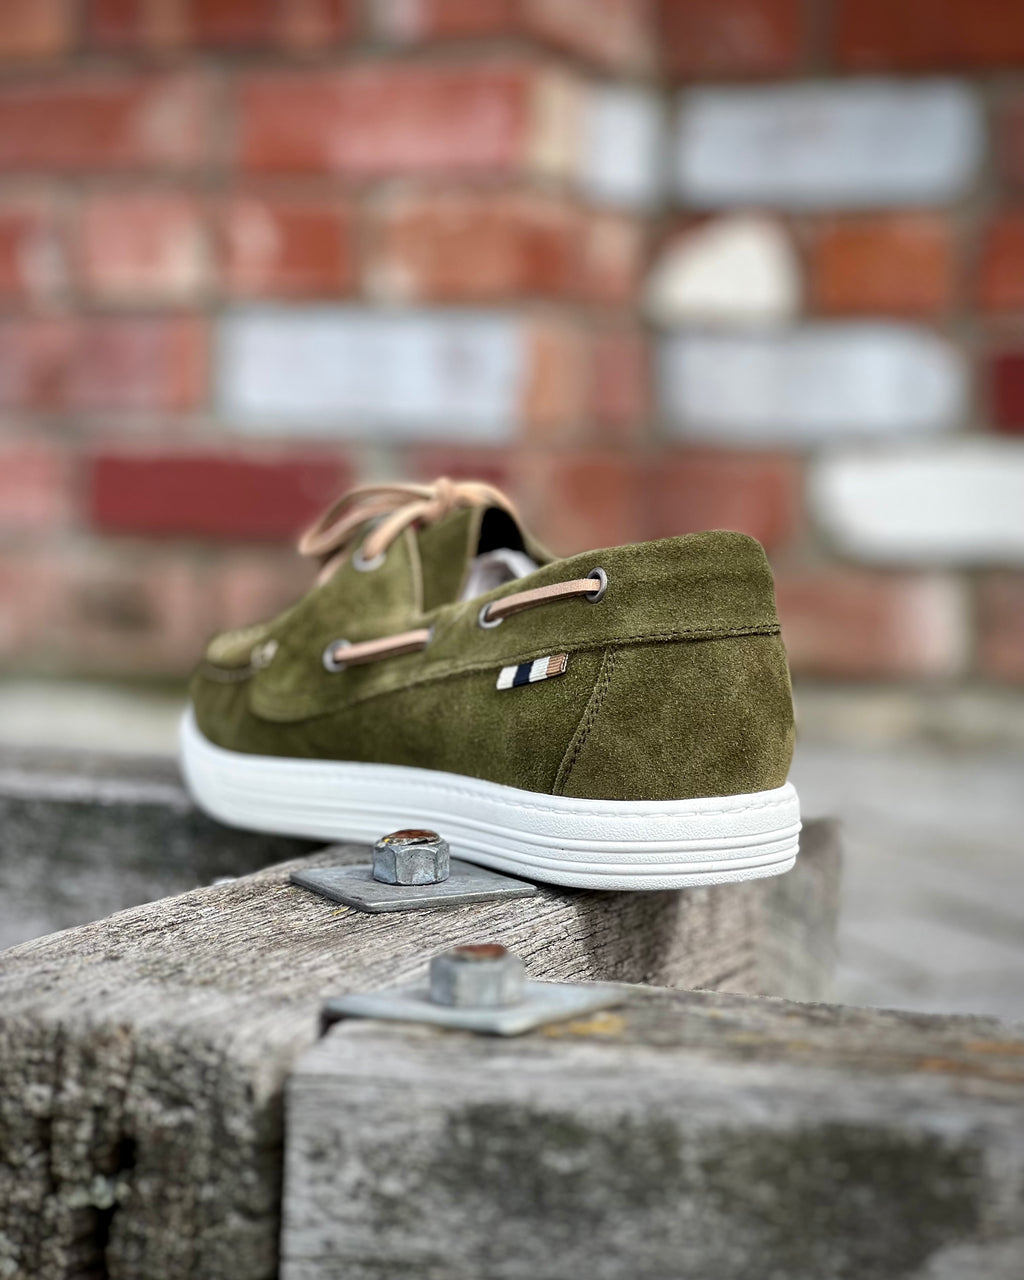 Suede leather boat shoes by Italiano - Olive green suede shoes